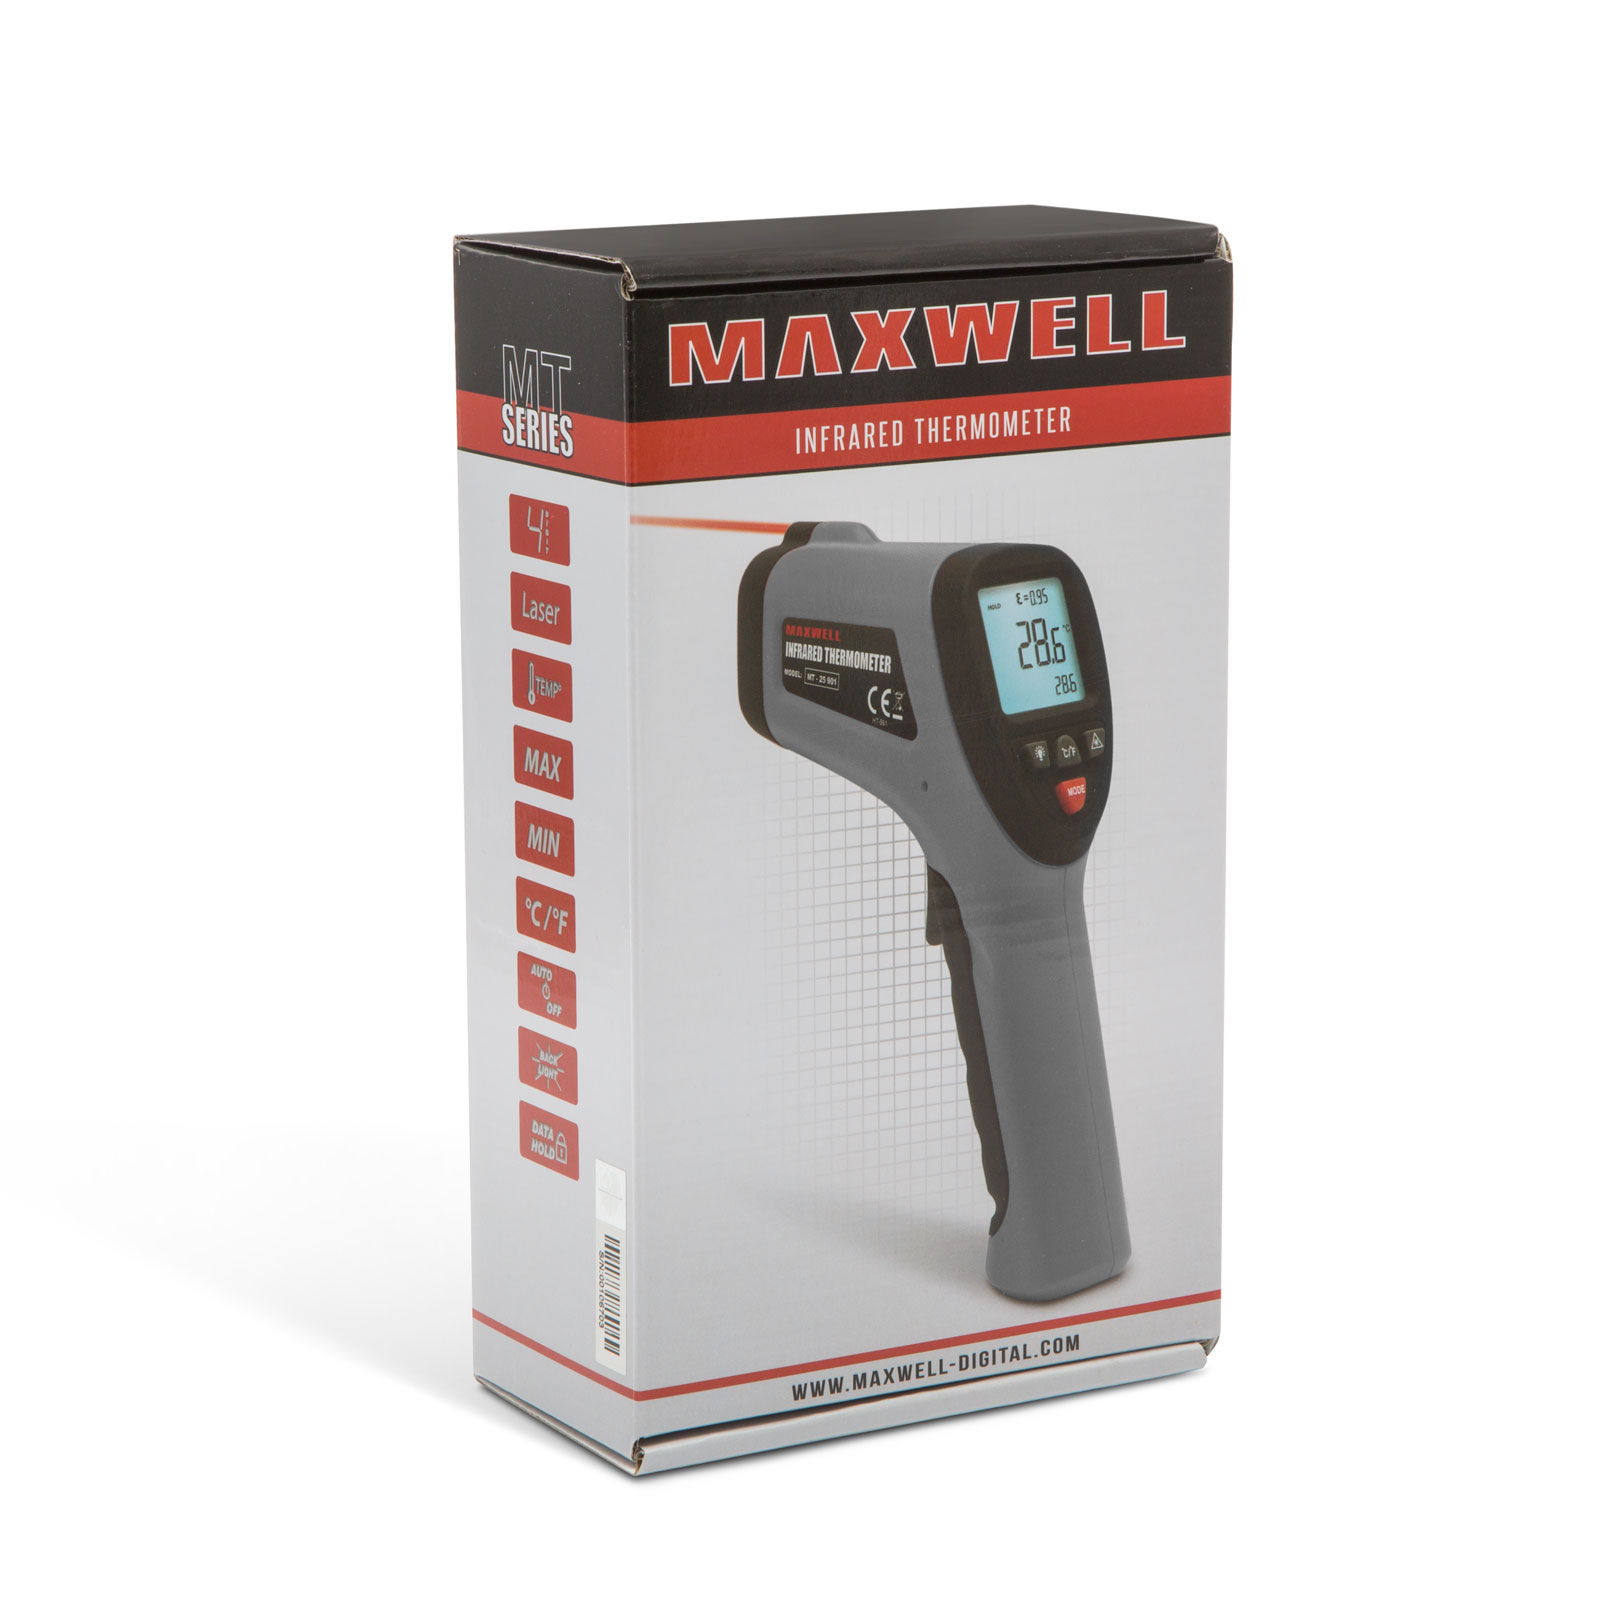 Digital infrared thermometer thumb